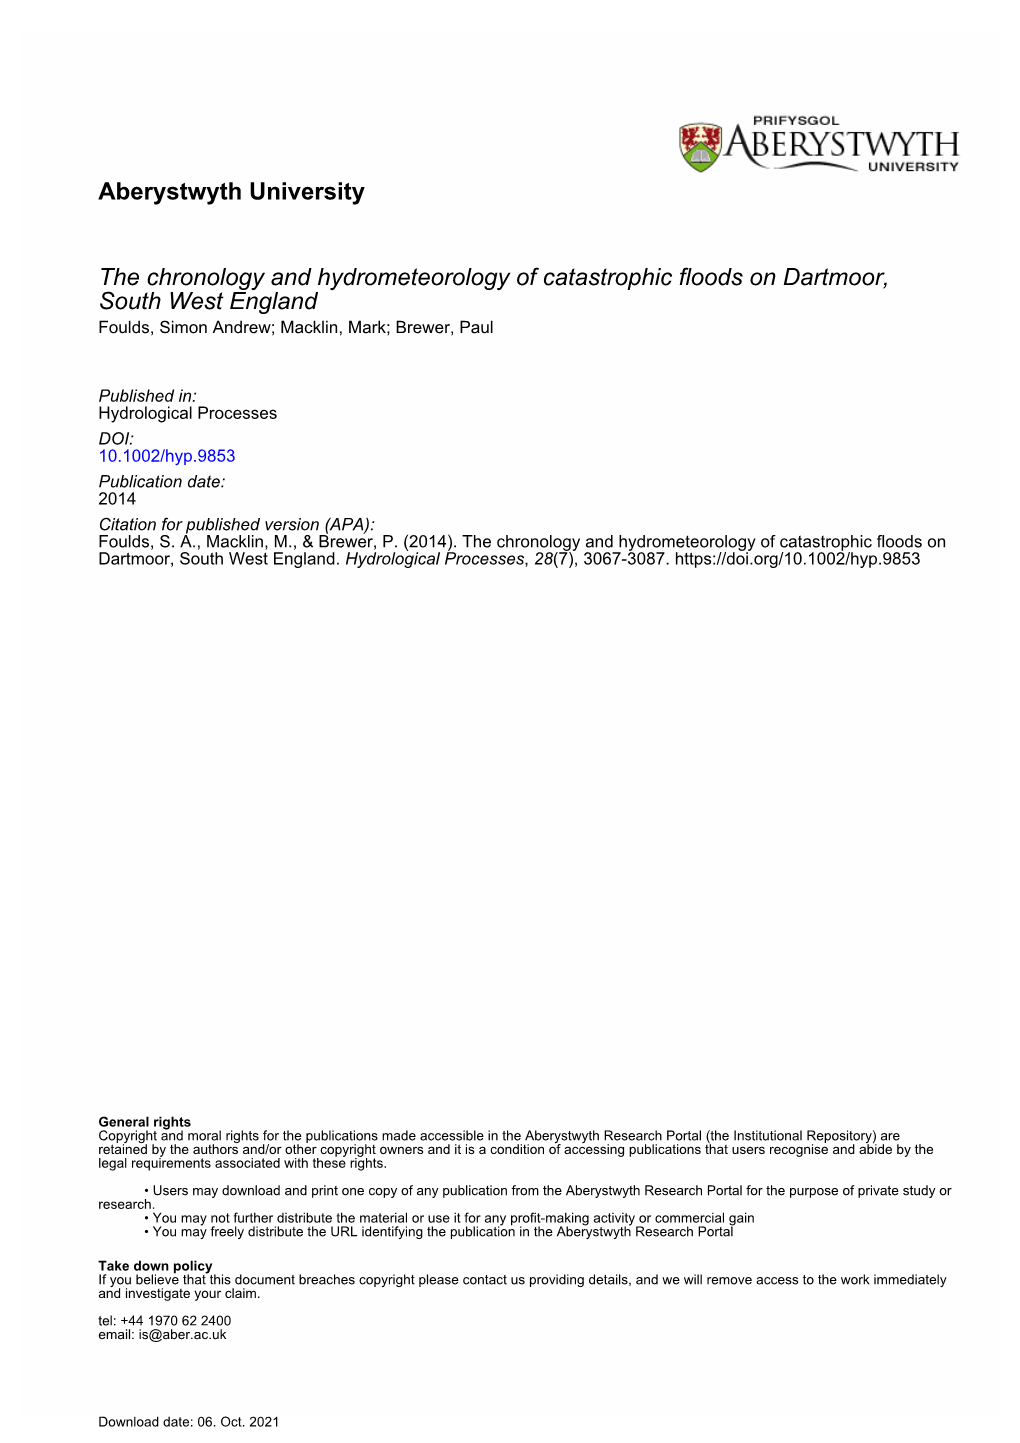 The Chronology and Hydrometeorology of Catastrophic Floods on Dartmoor, South West England Foulds, Simon Andrew; Macklin, Mark; Brewer, Paul